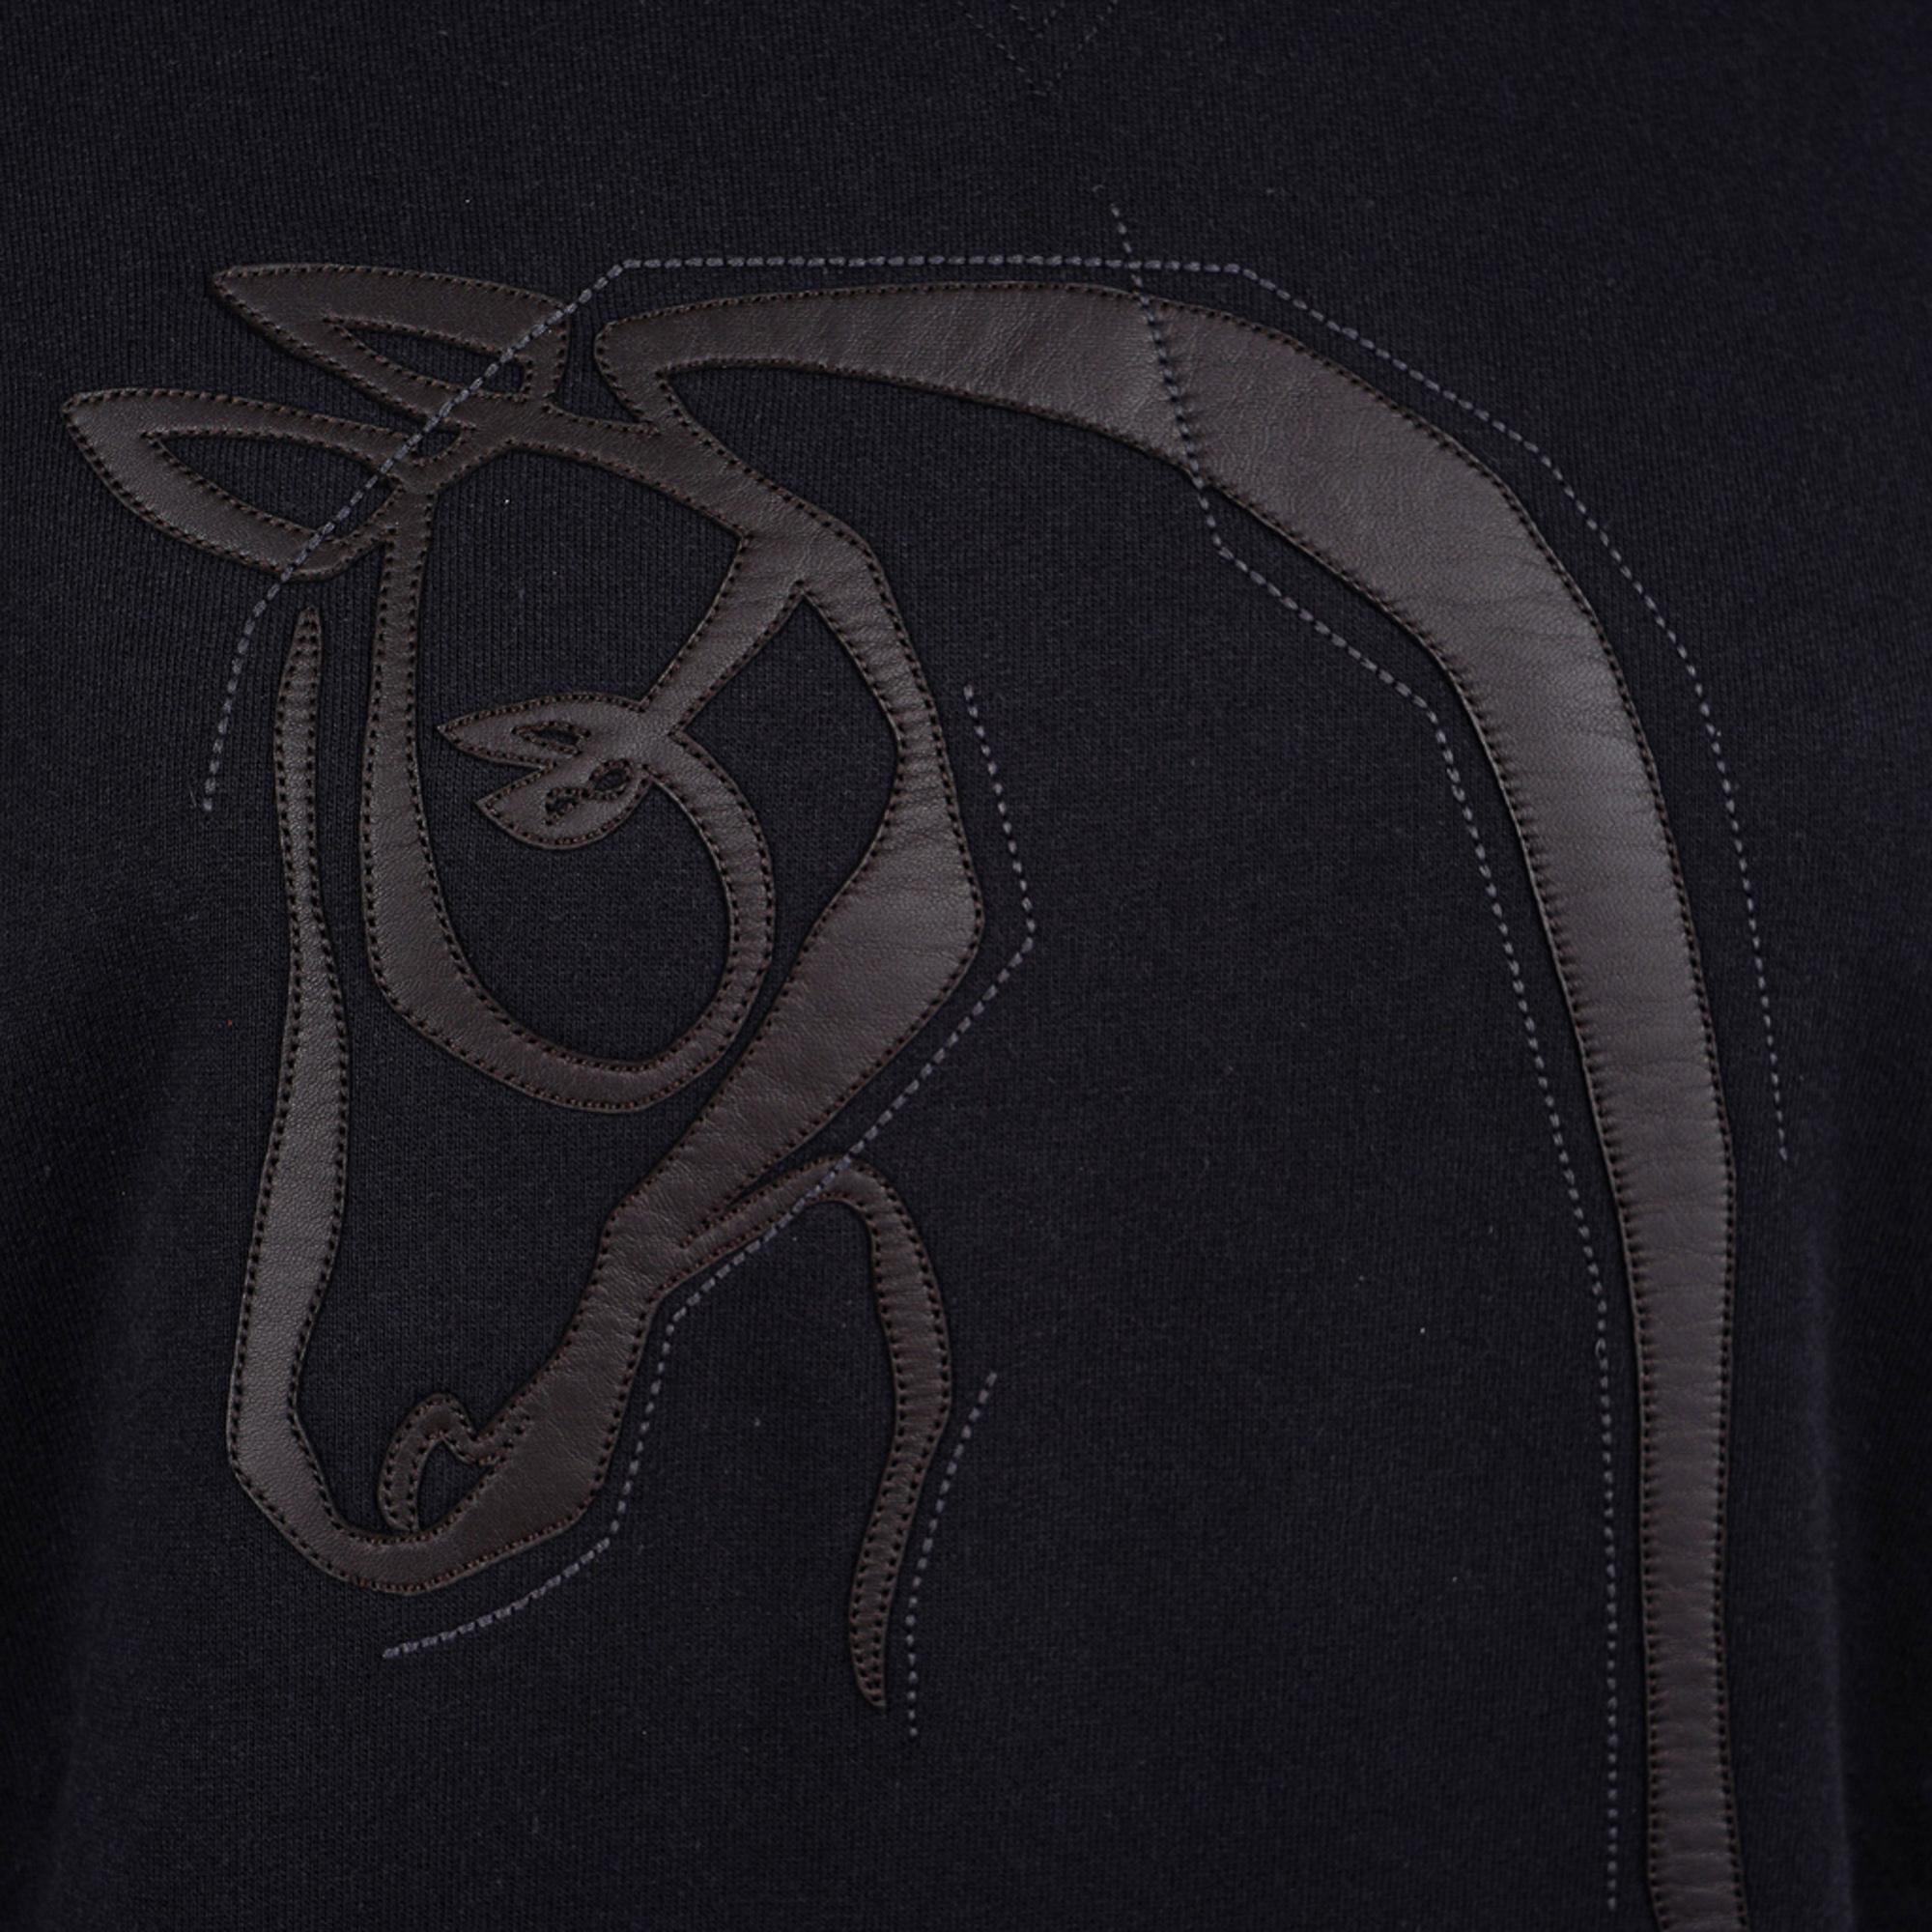 Mightychic offers an Hermes Crewneck Sweater (sweatshirt) with Leather Detail.
Black Cotton with Black Cheval au Trait lambskin patch in front.
Ribbed cuffs and hip.
Fabric is cotton.
NEW or NEVER WORN.
final sale

SIZE: M

SWEATER MEASURES:
LENGTH